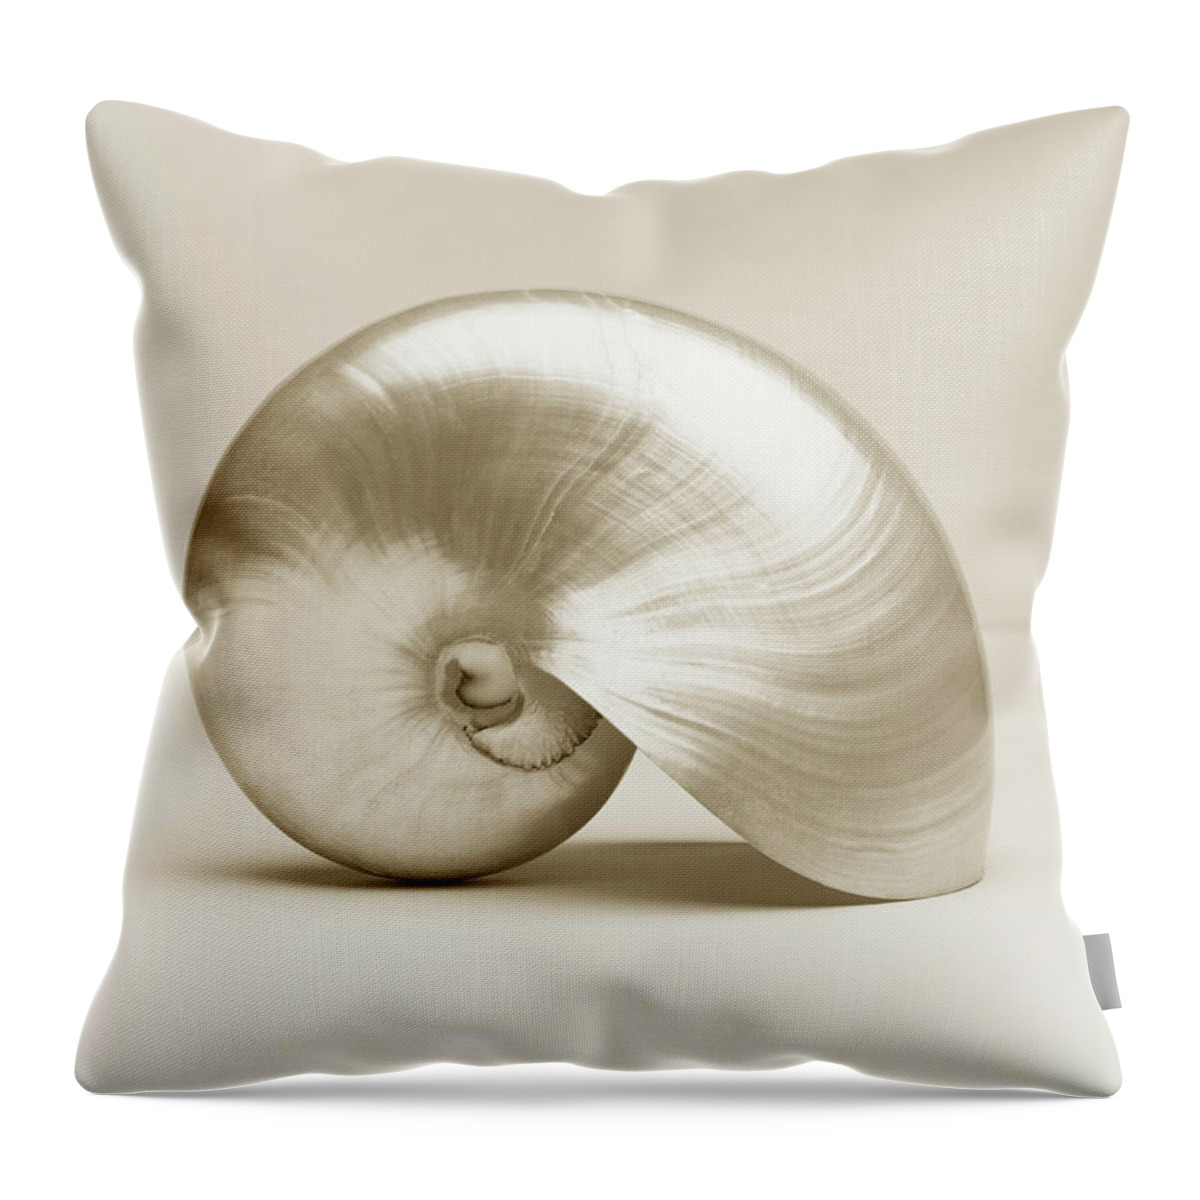 Animal Shell Throw Pillow featuring the photograph Pearlised Nautilus Sea Shell, Close-up by Finn Fox